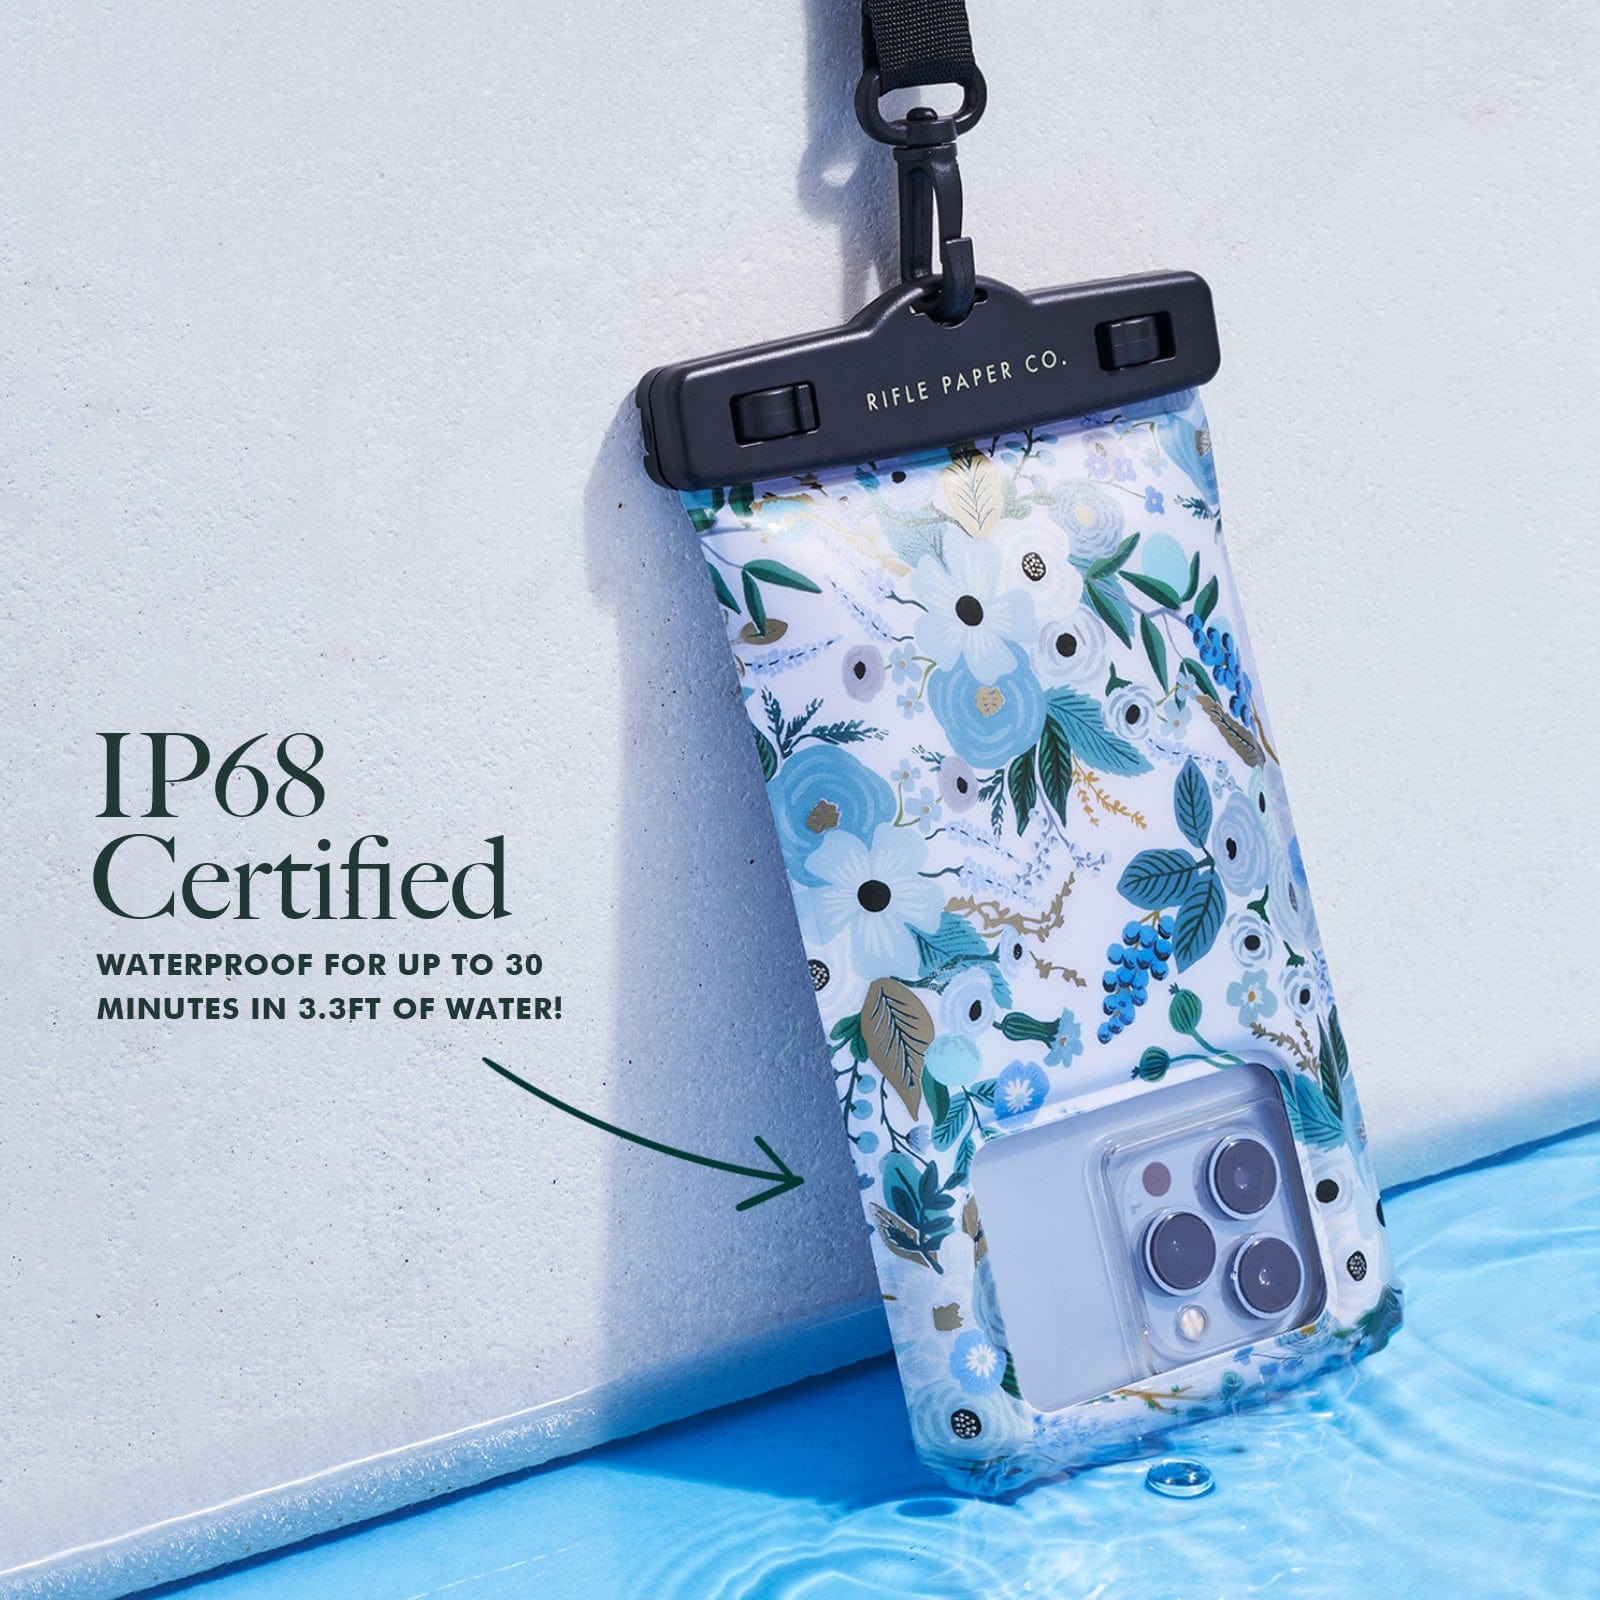 IP68 CERTIFIED. WATERPROOF FOR UP TO 30 MINUTES IN 3.3 FT OF WATER